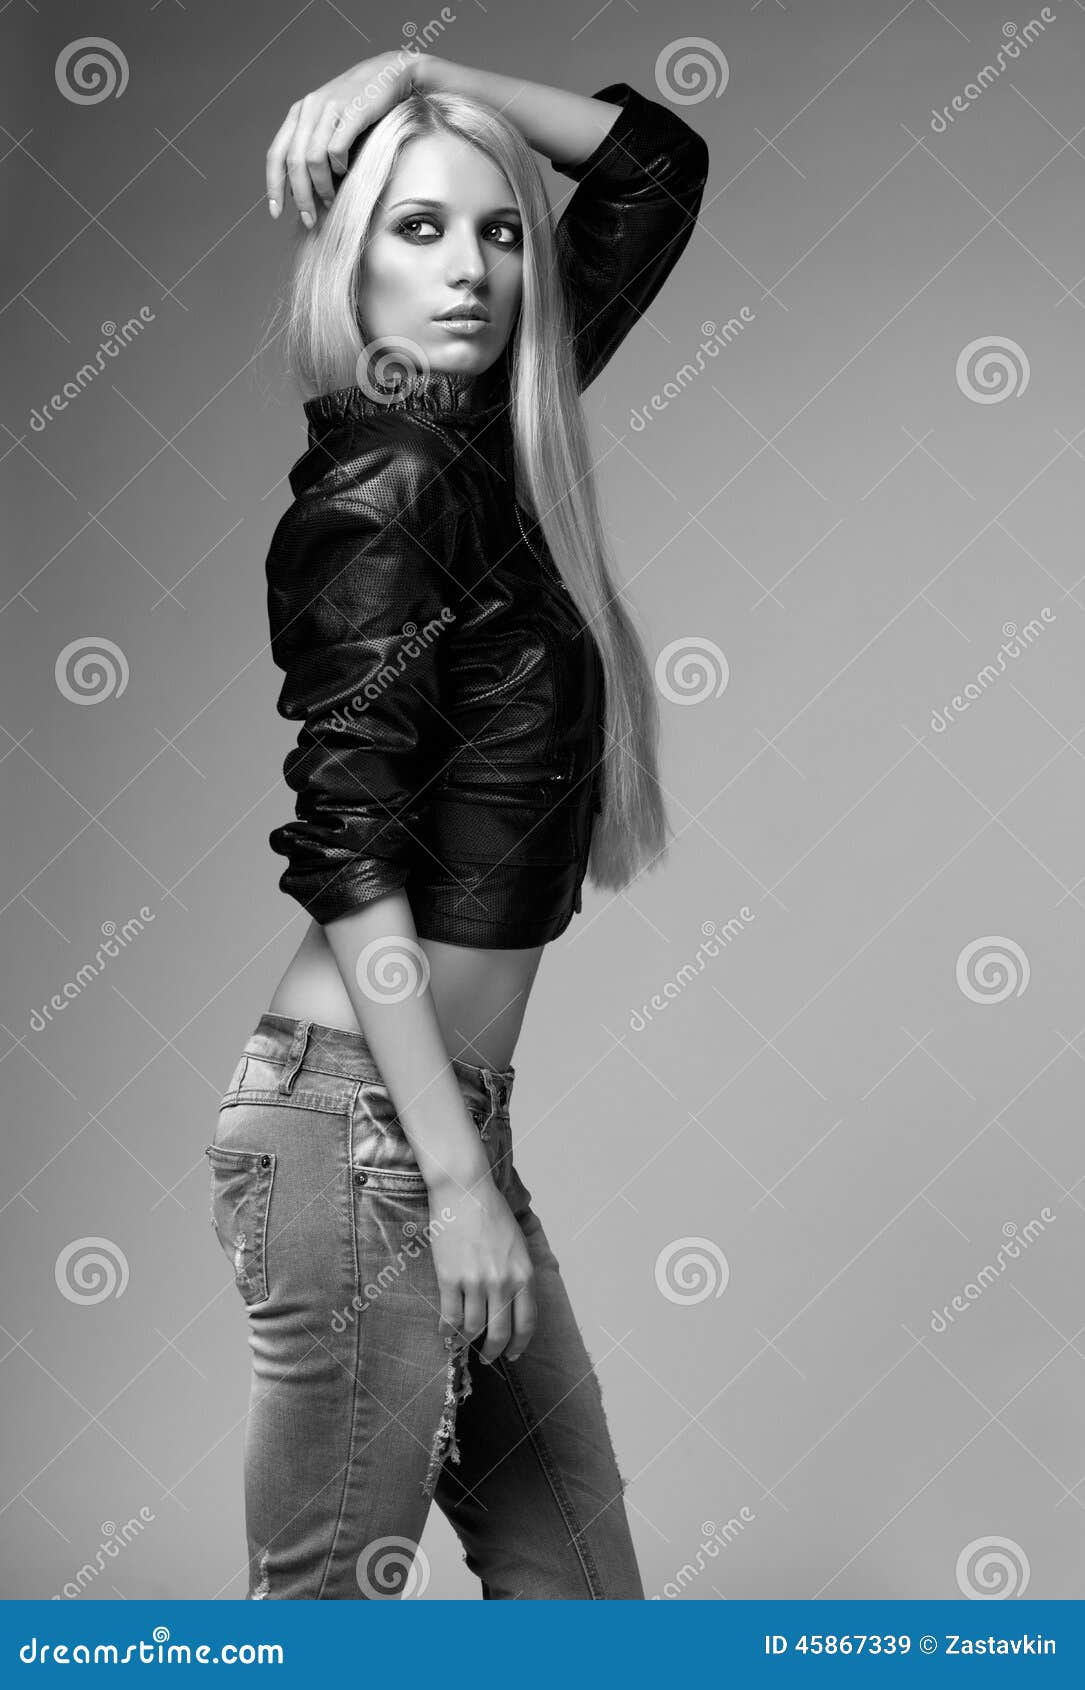 Blonde Woman in Ragged Jeans and Jacket Stock Image - Image of legs ...